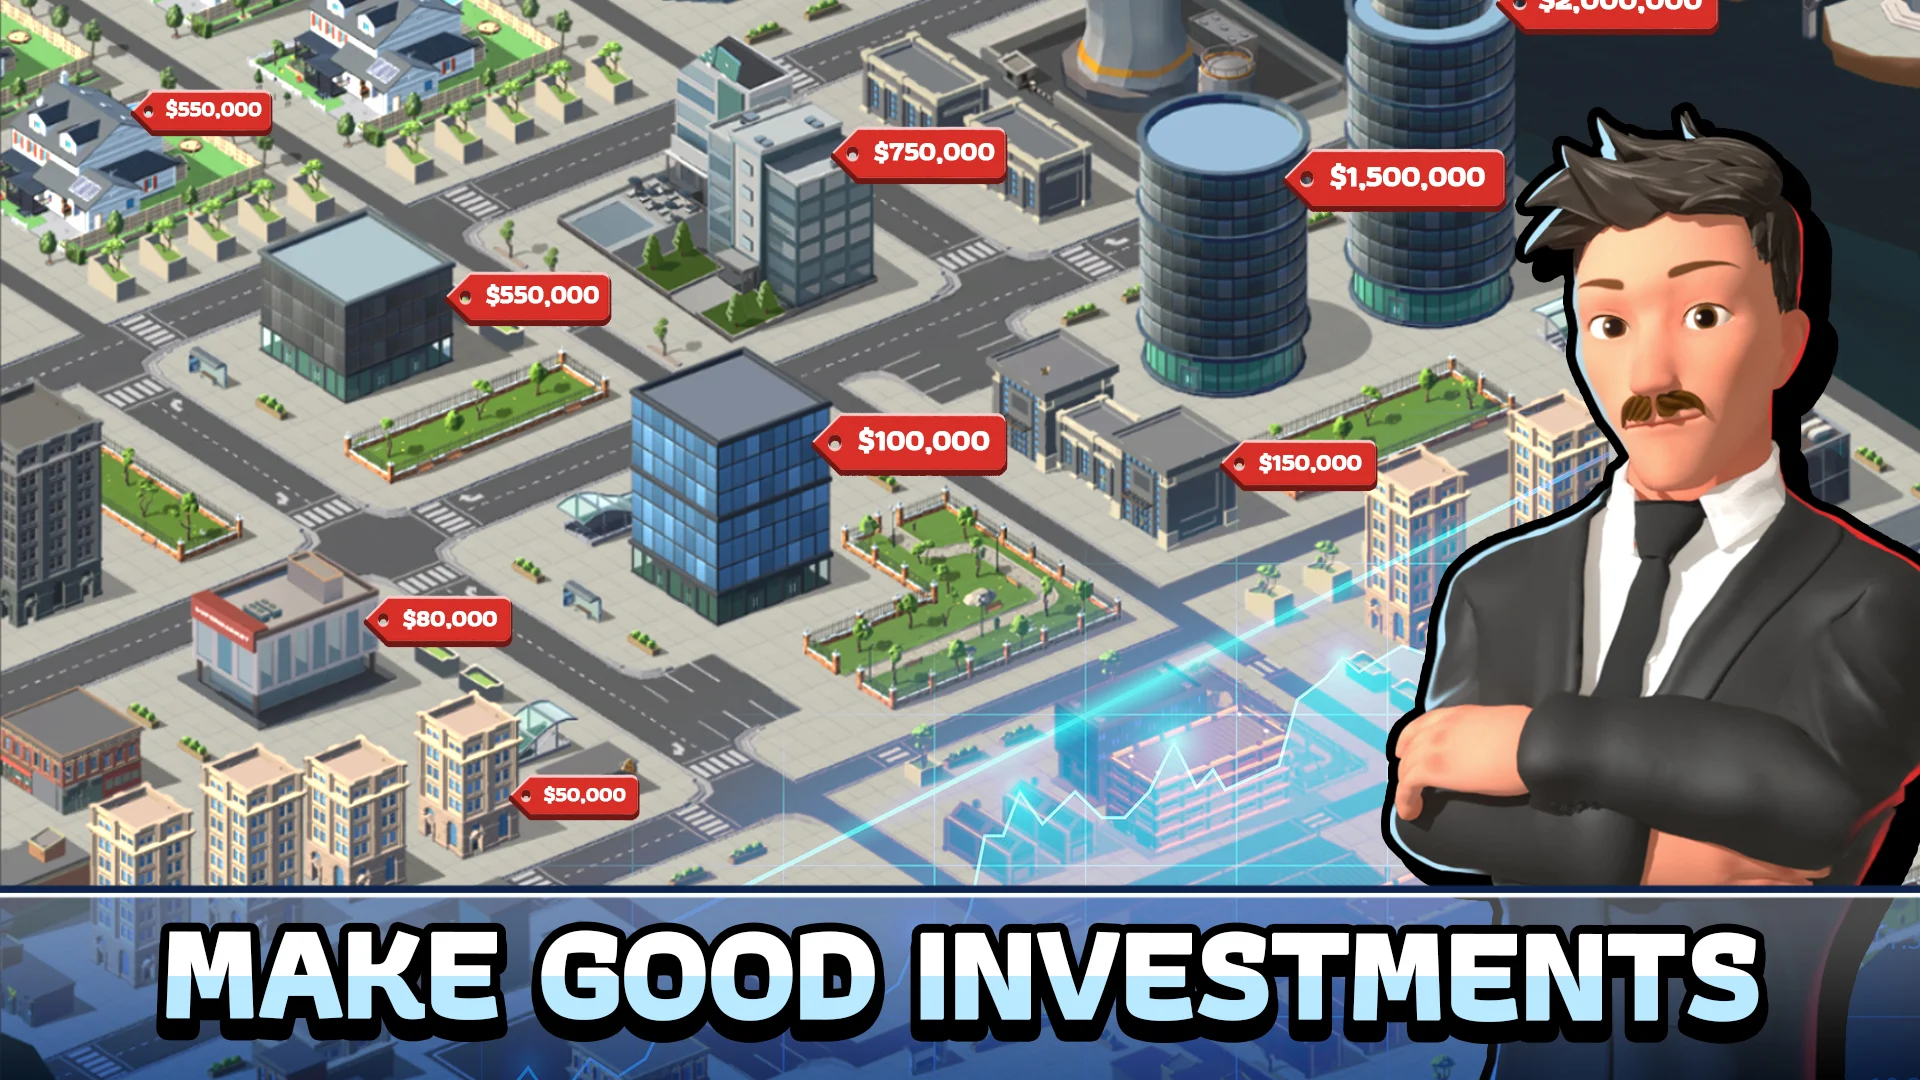 Idle Office Tycoon 